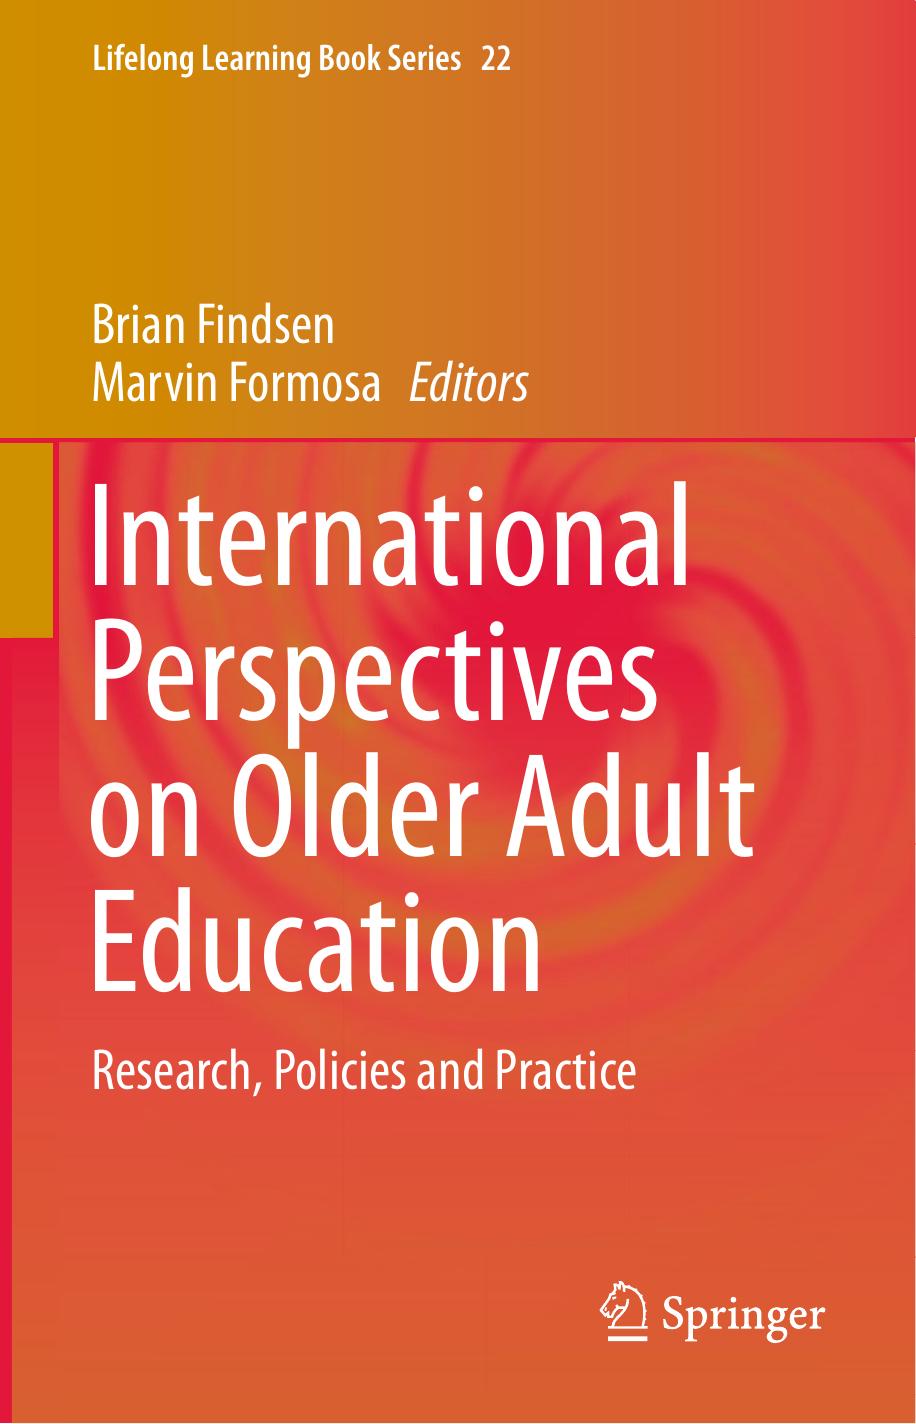 International Perspectives on Older Adult Education  Research, Policies and Practice 2016.pdf